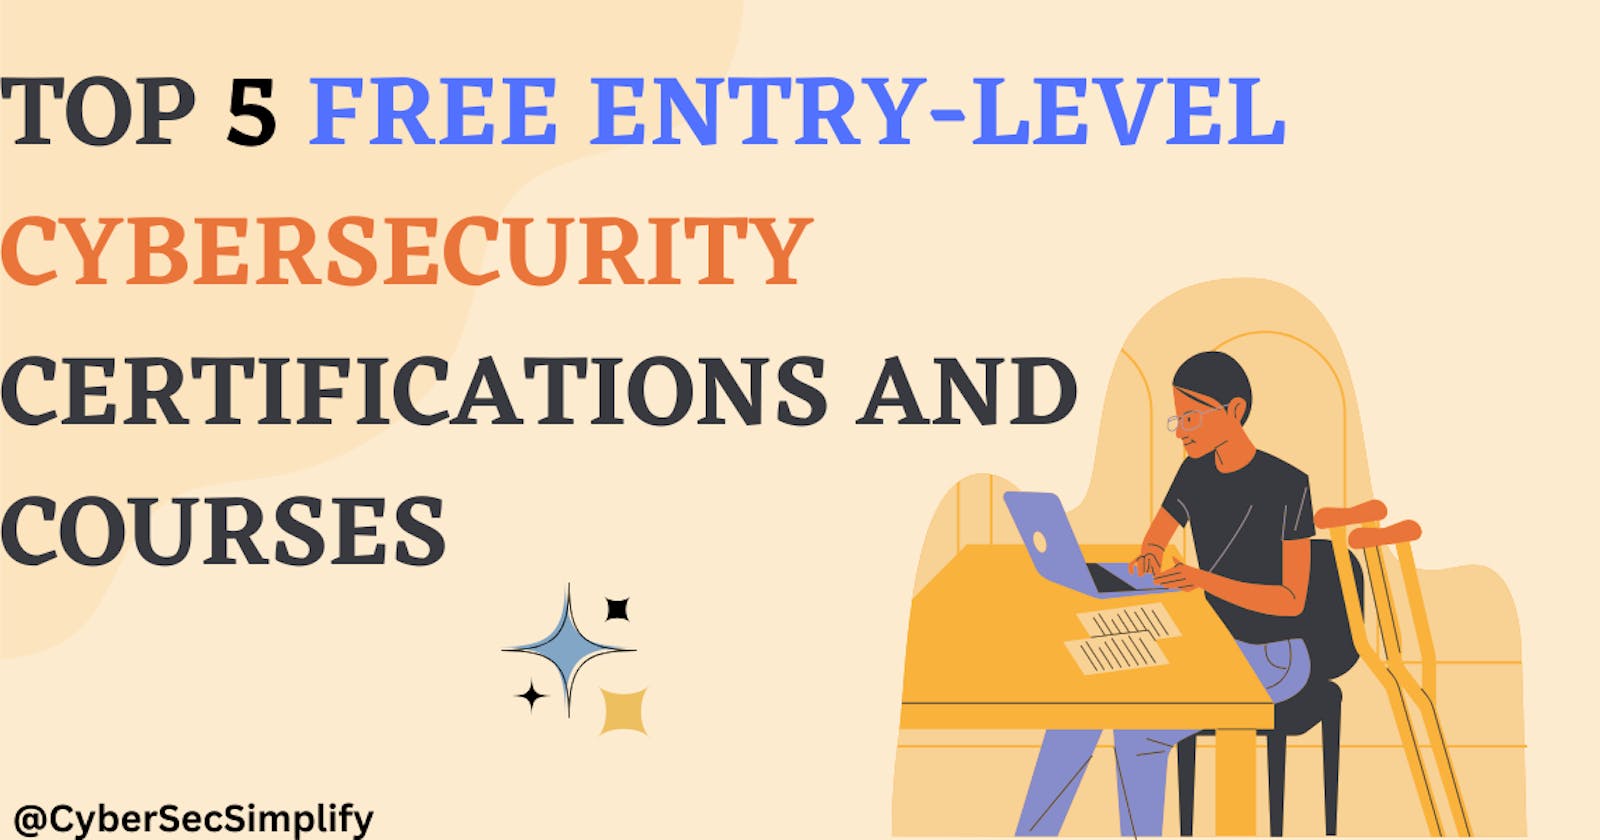 Top 5 Free Entry-Level Cybersecurity Certifications and Courses by EC-Council